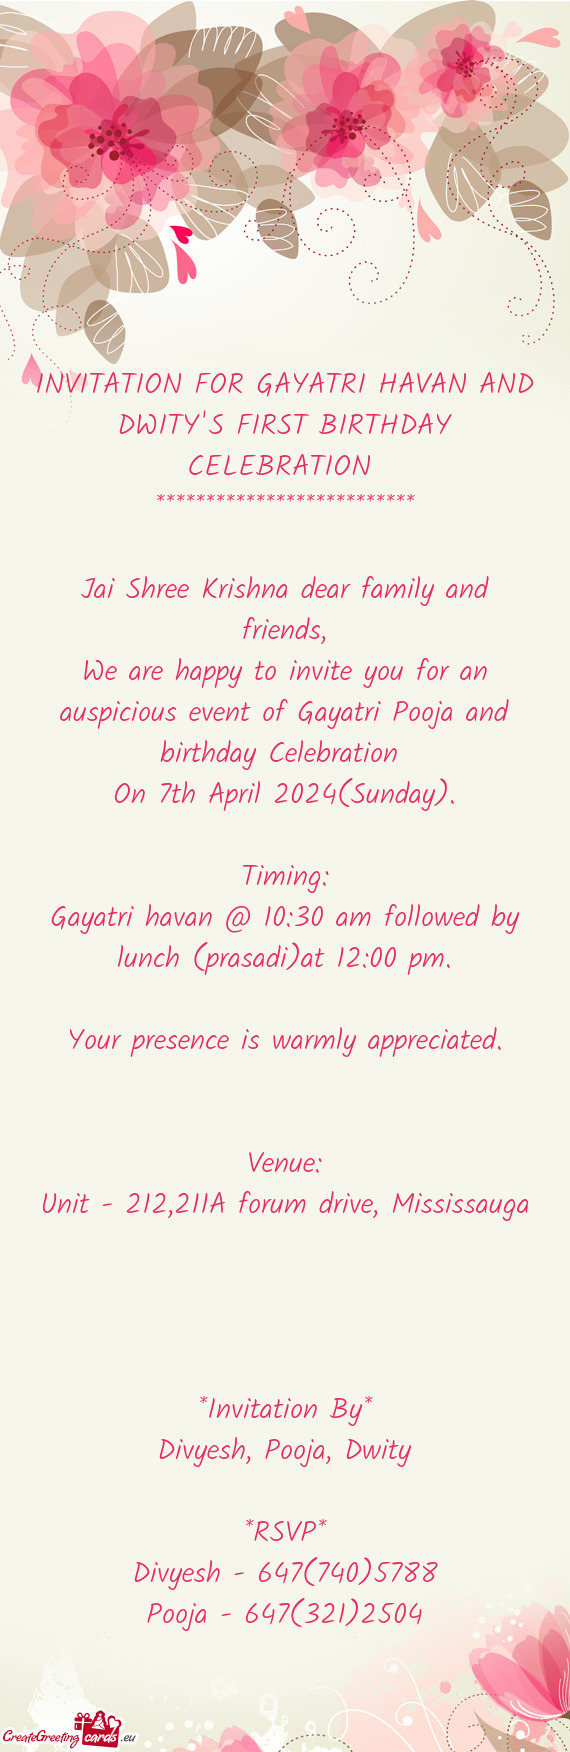 We are happy to invite you for an auspicious event of Gayatri Pooja and birthday Celebration